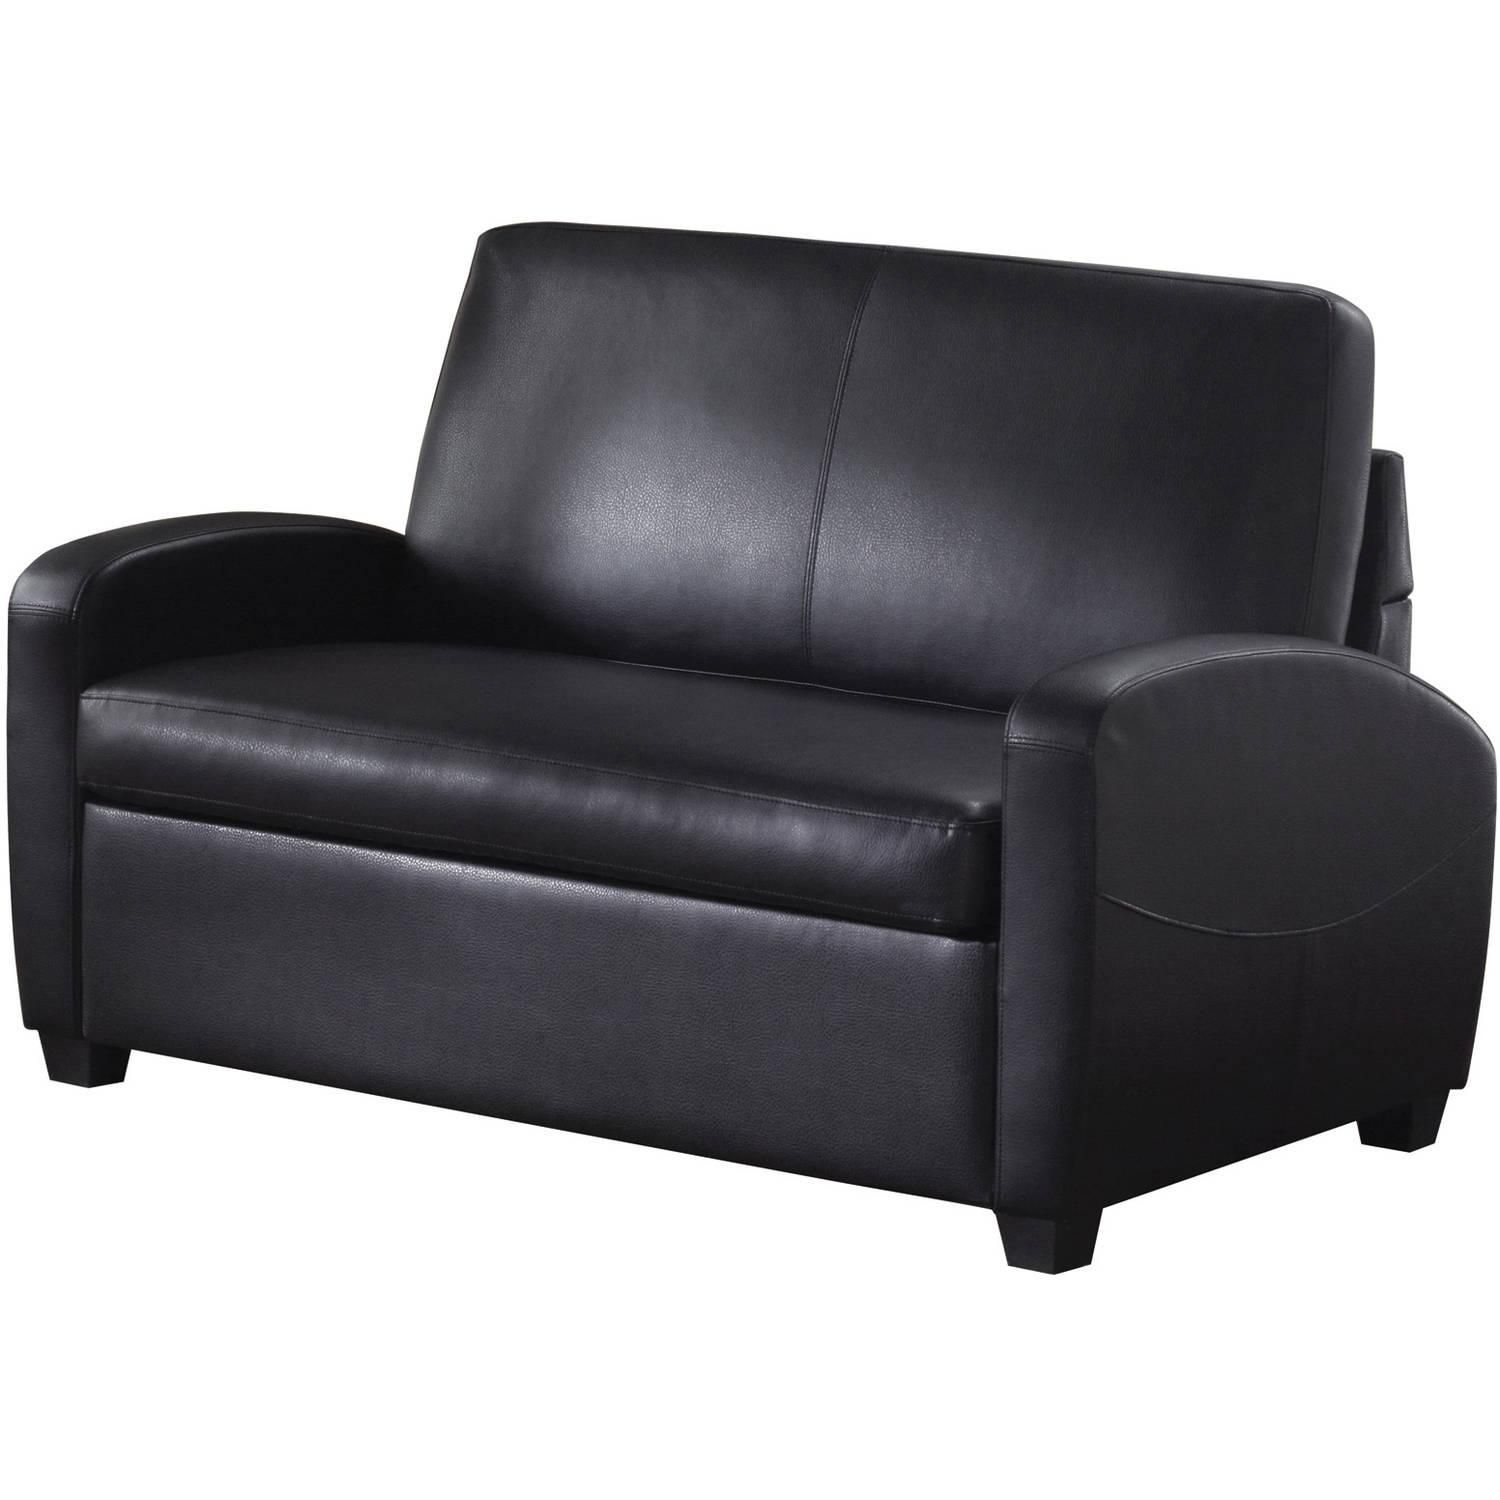 Mainstays Sofa Sleeper, Black – Walmart With Black Leather Convertible Sofas (View 18 of 20)